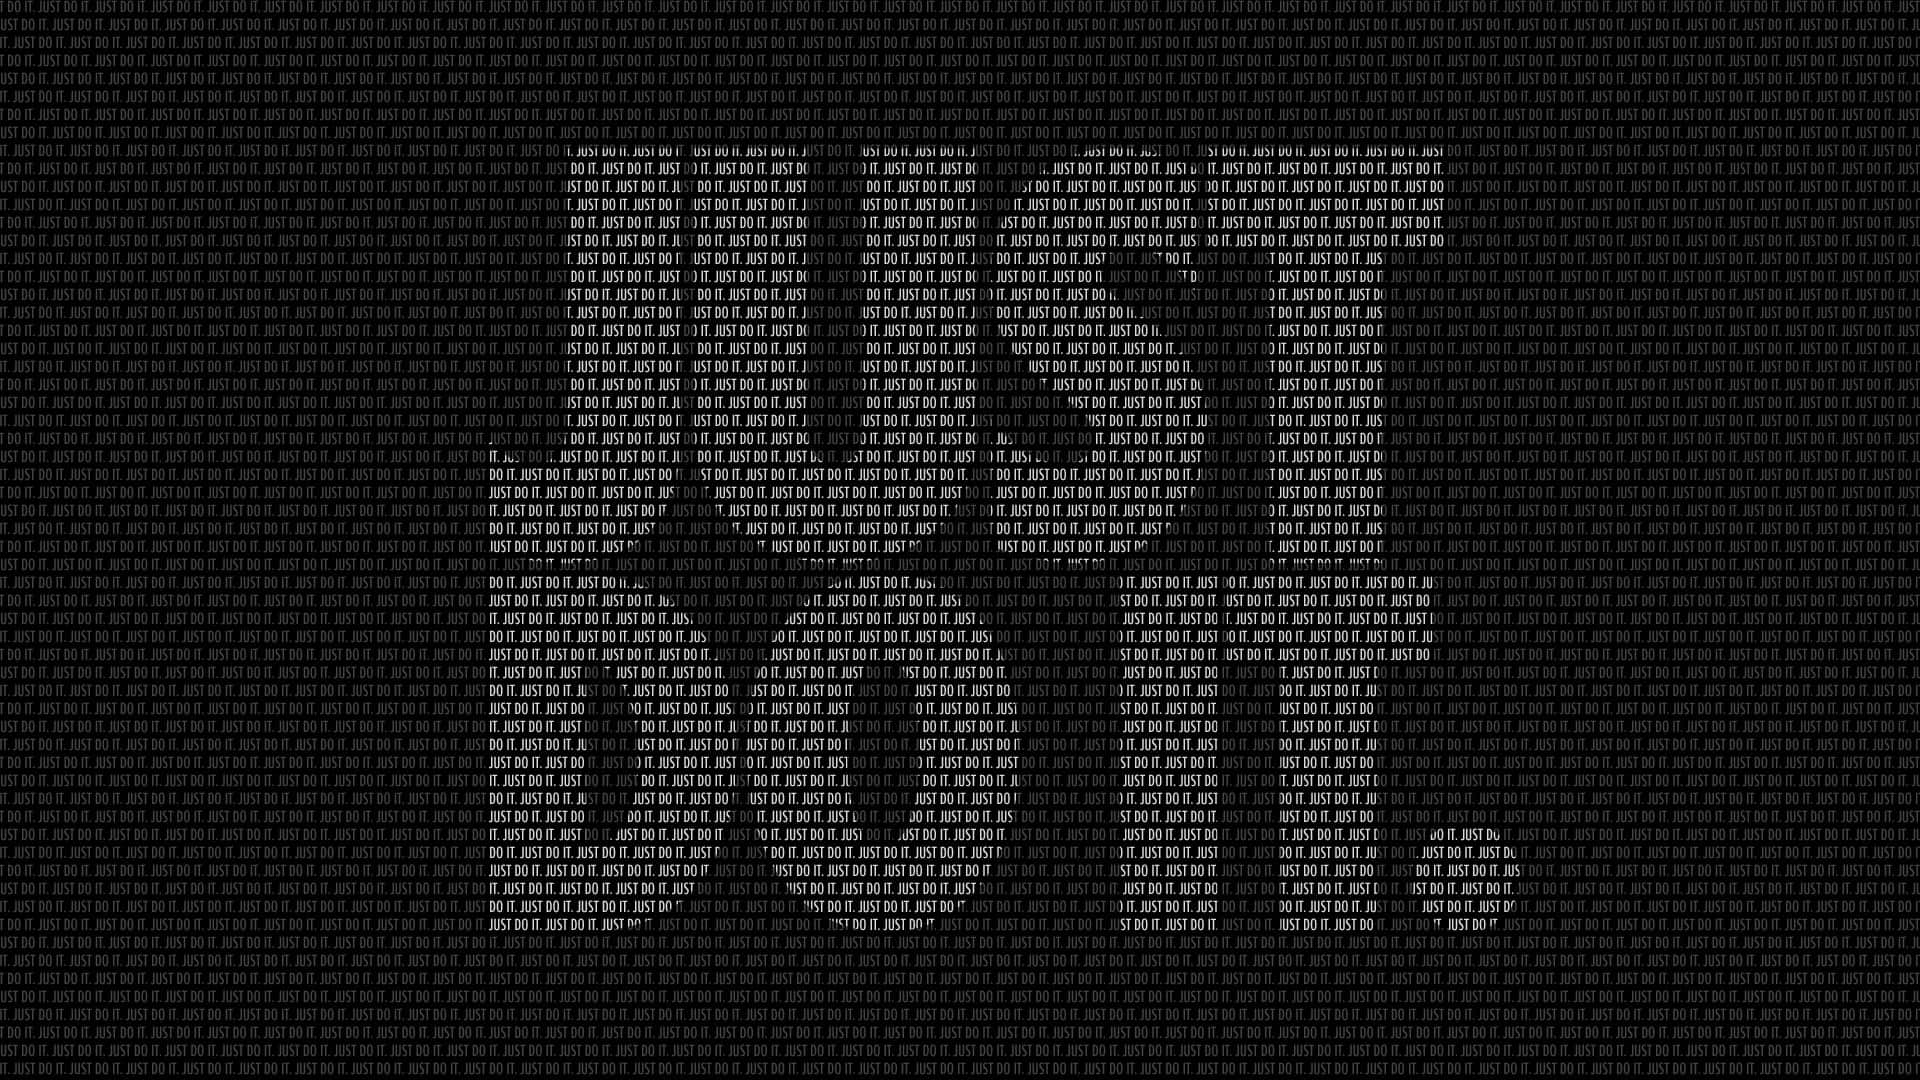 Image result for nike just do it  Just do it wallpapers, Just do it, Nike  logo wallpapers